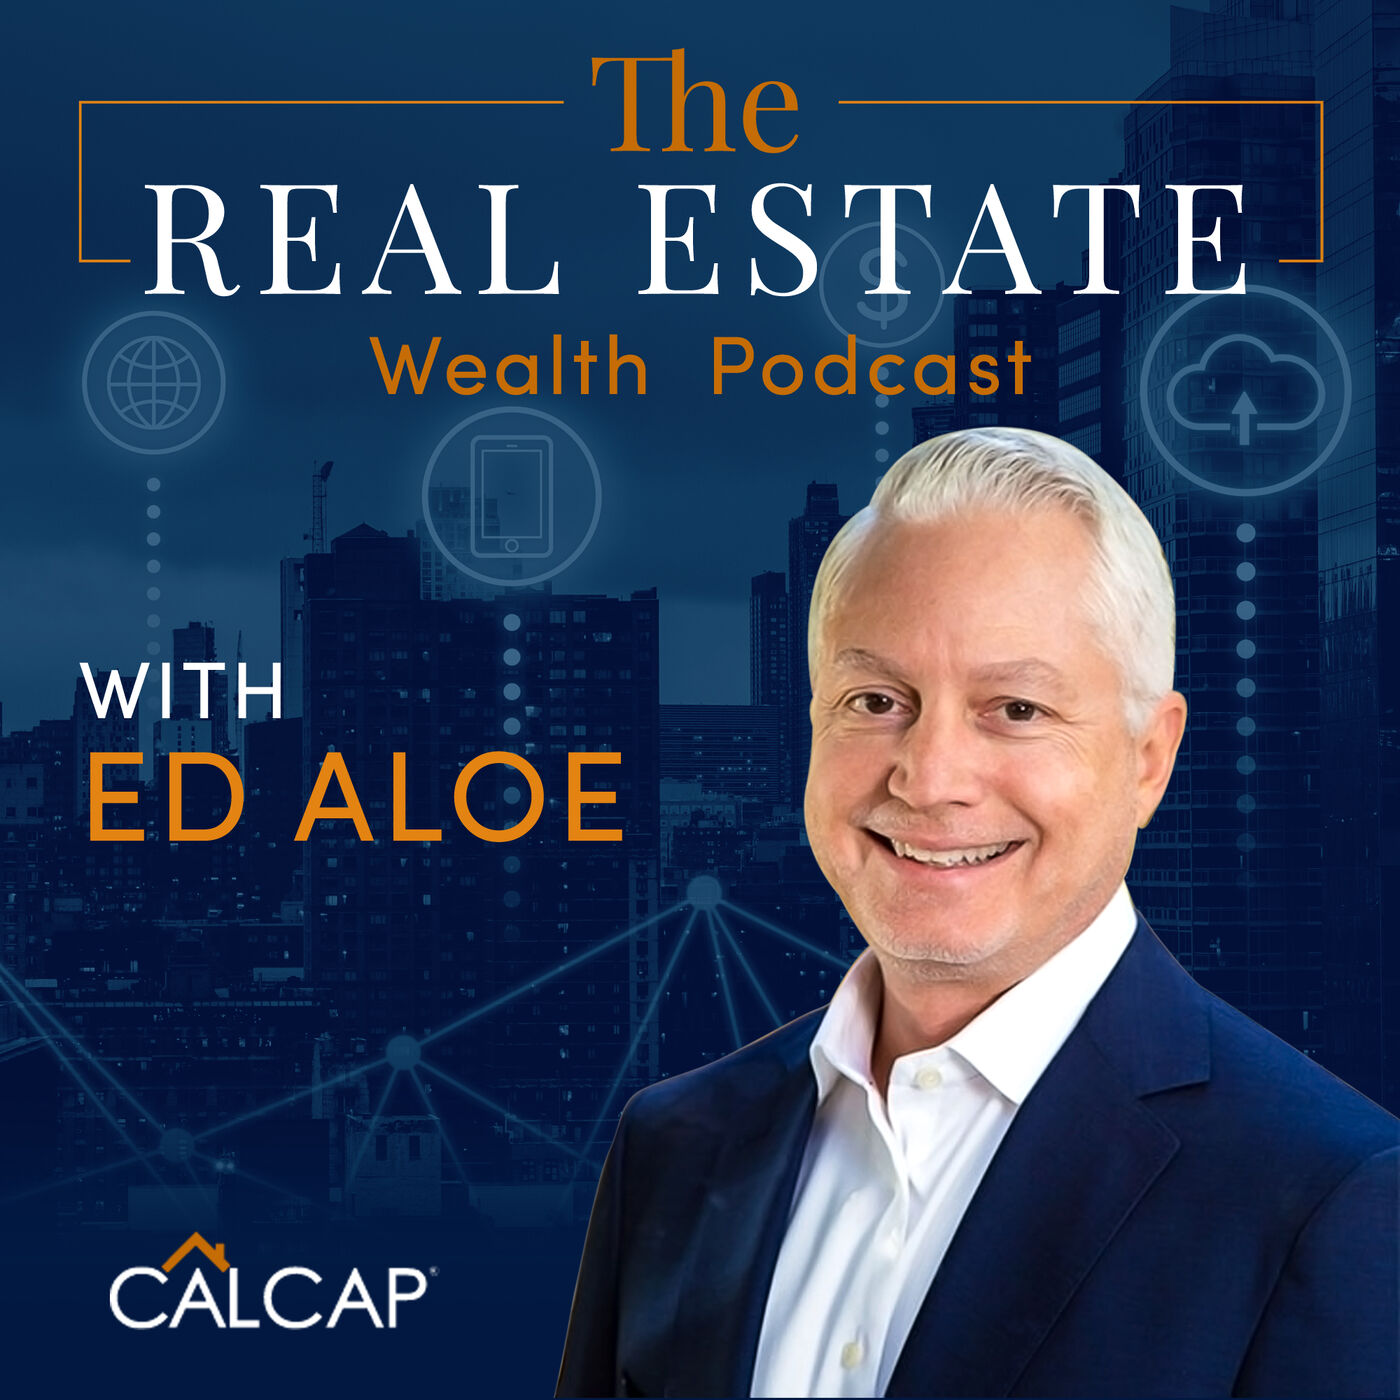 Show artwork for The Real Estate Wealth Podcast with Edward Aloe